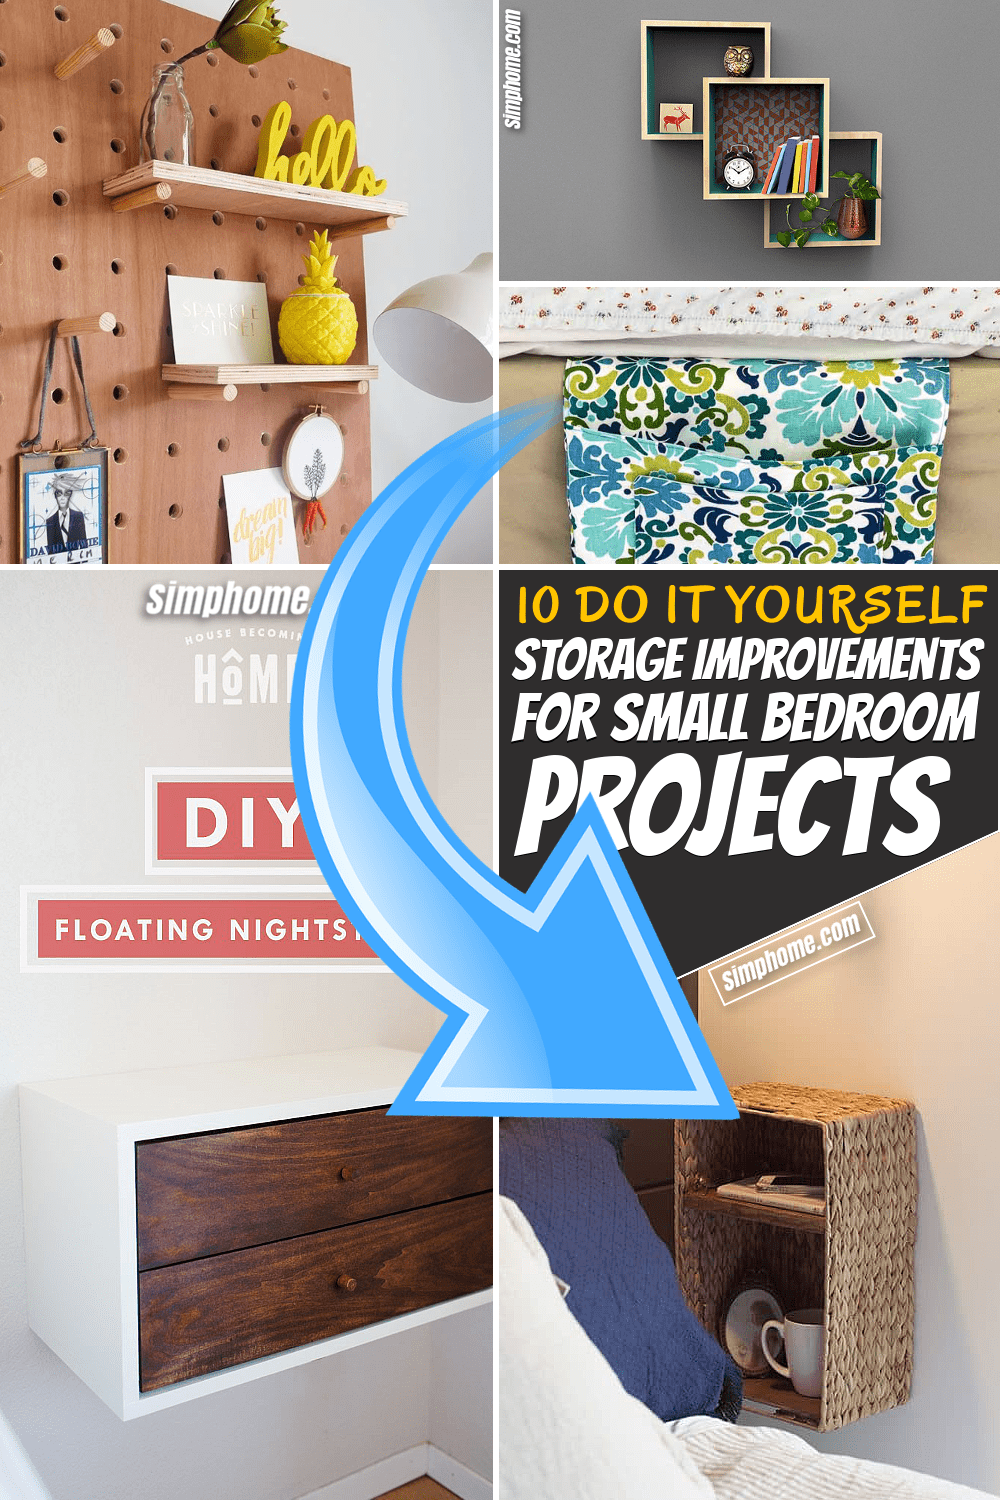 Simphome.com 10 DIY Storage Improvement Project for Small Bedroom Featured Pinterest Image